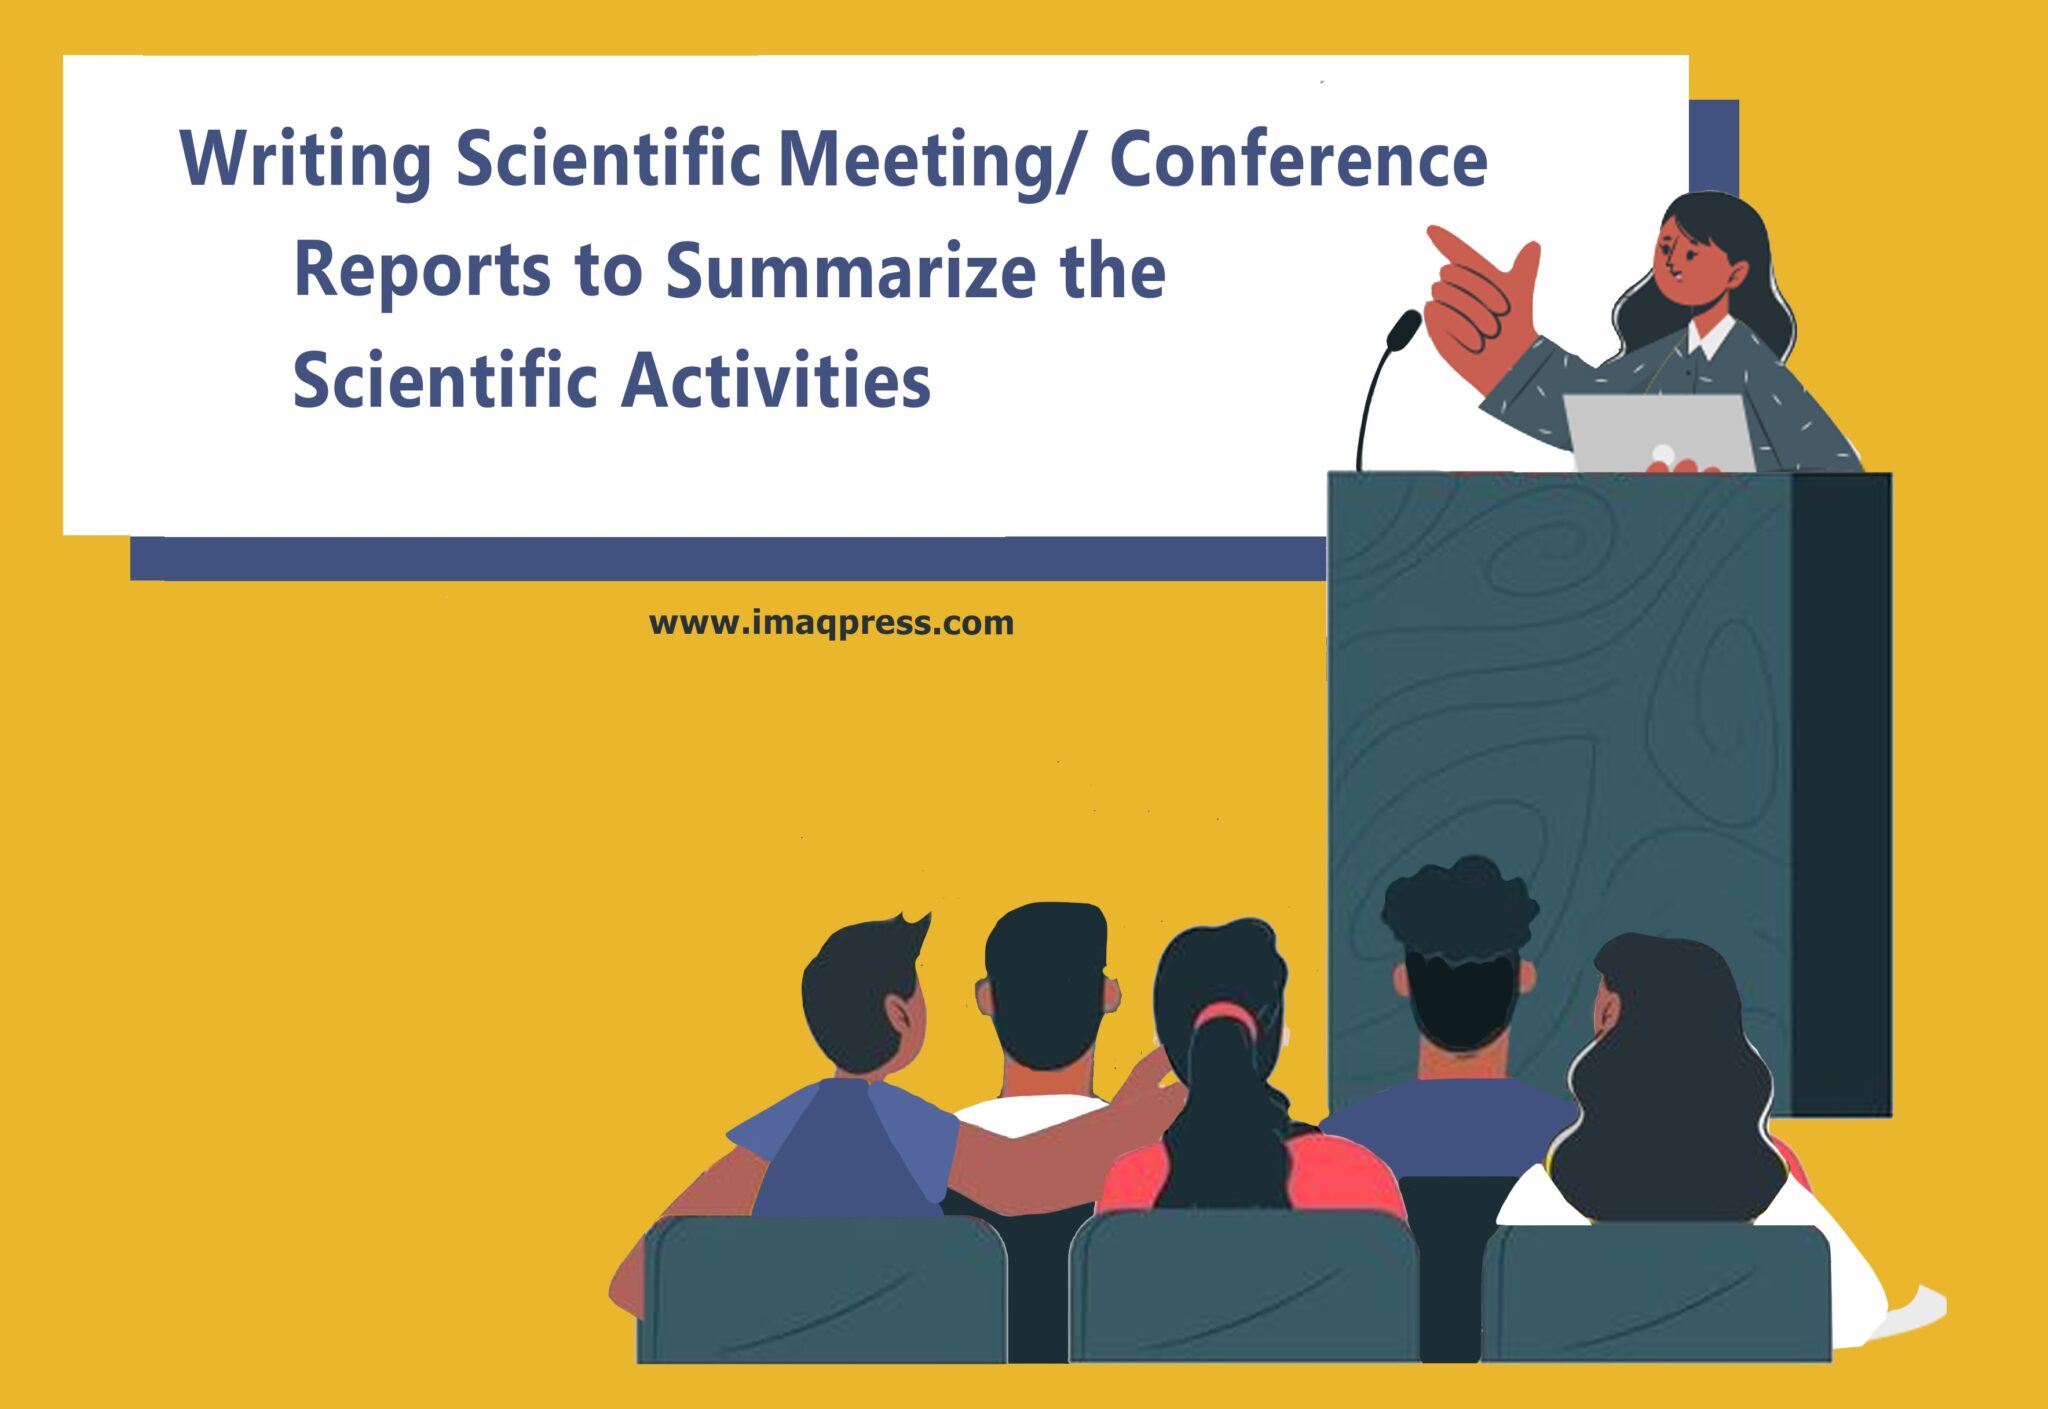 Writing Scientific Meeting or Conference Reports to Summarize the